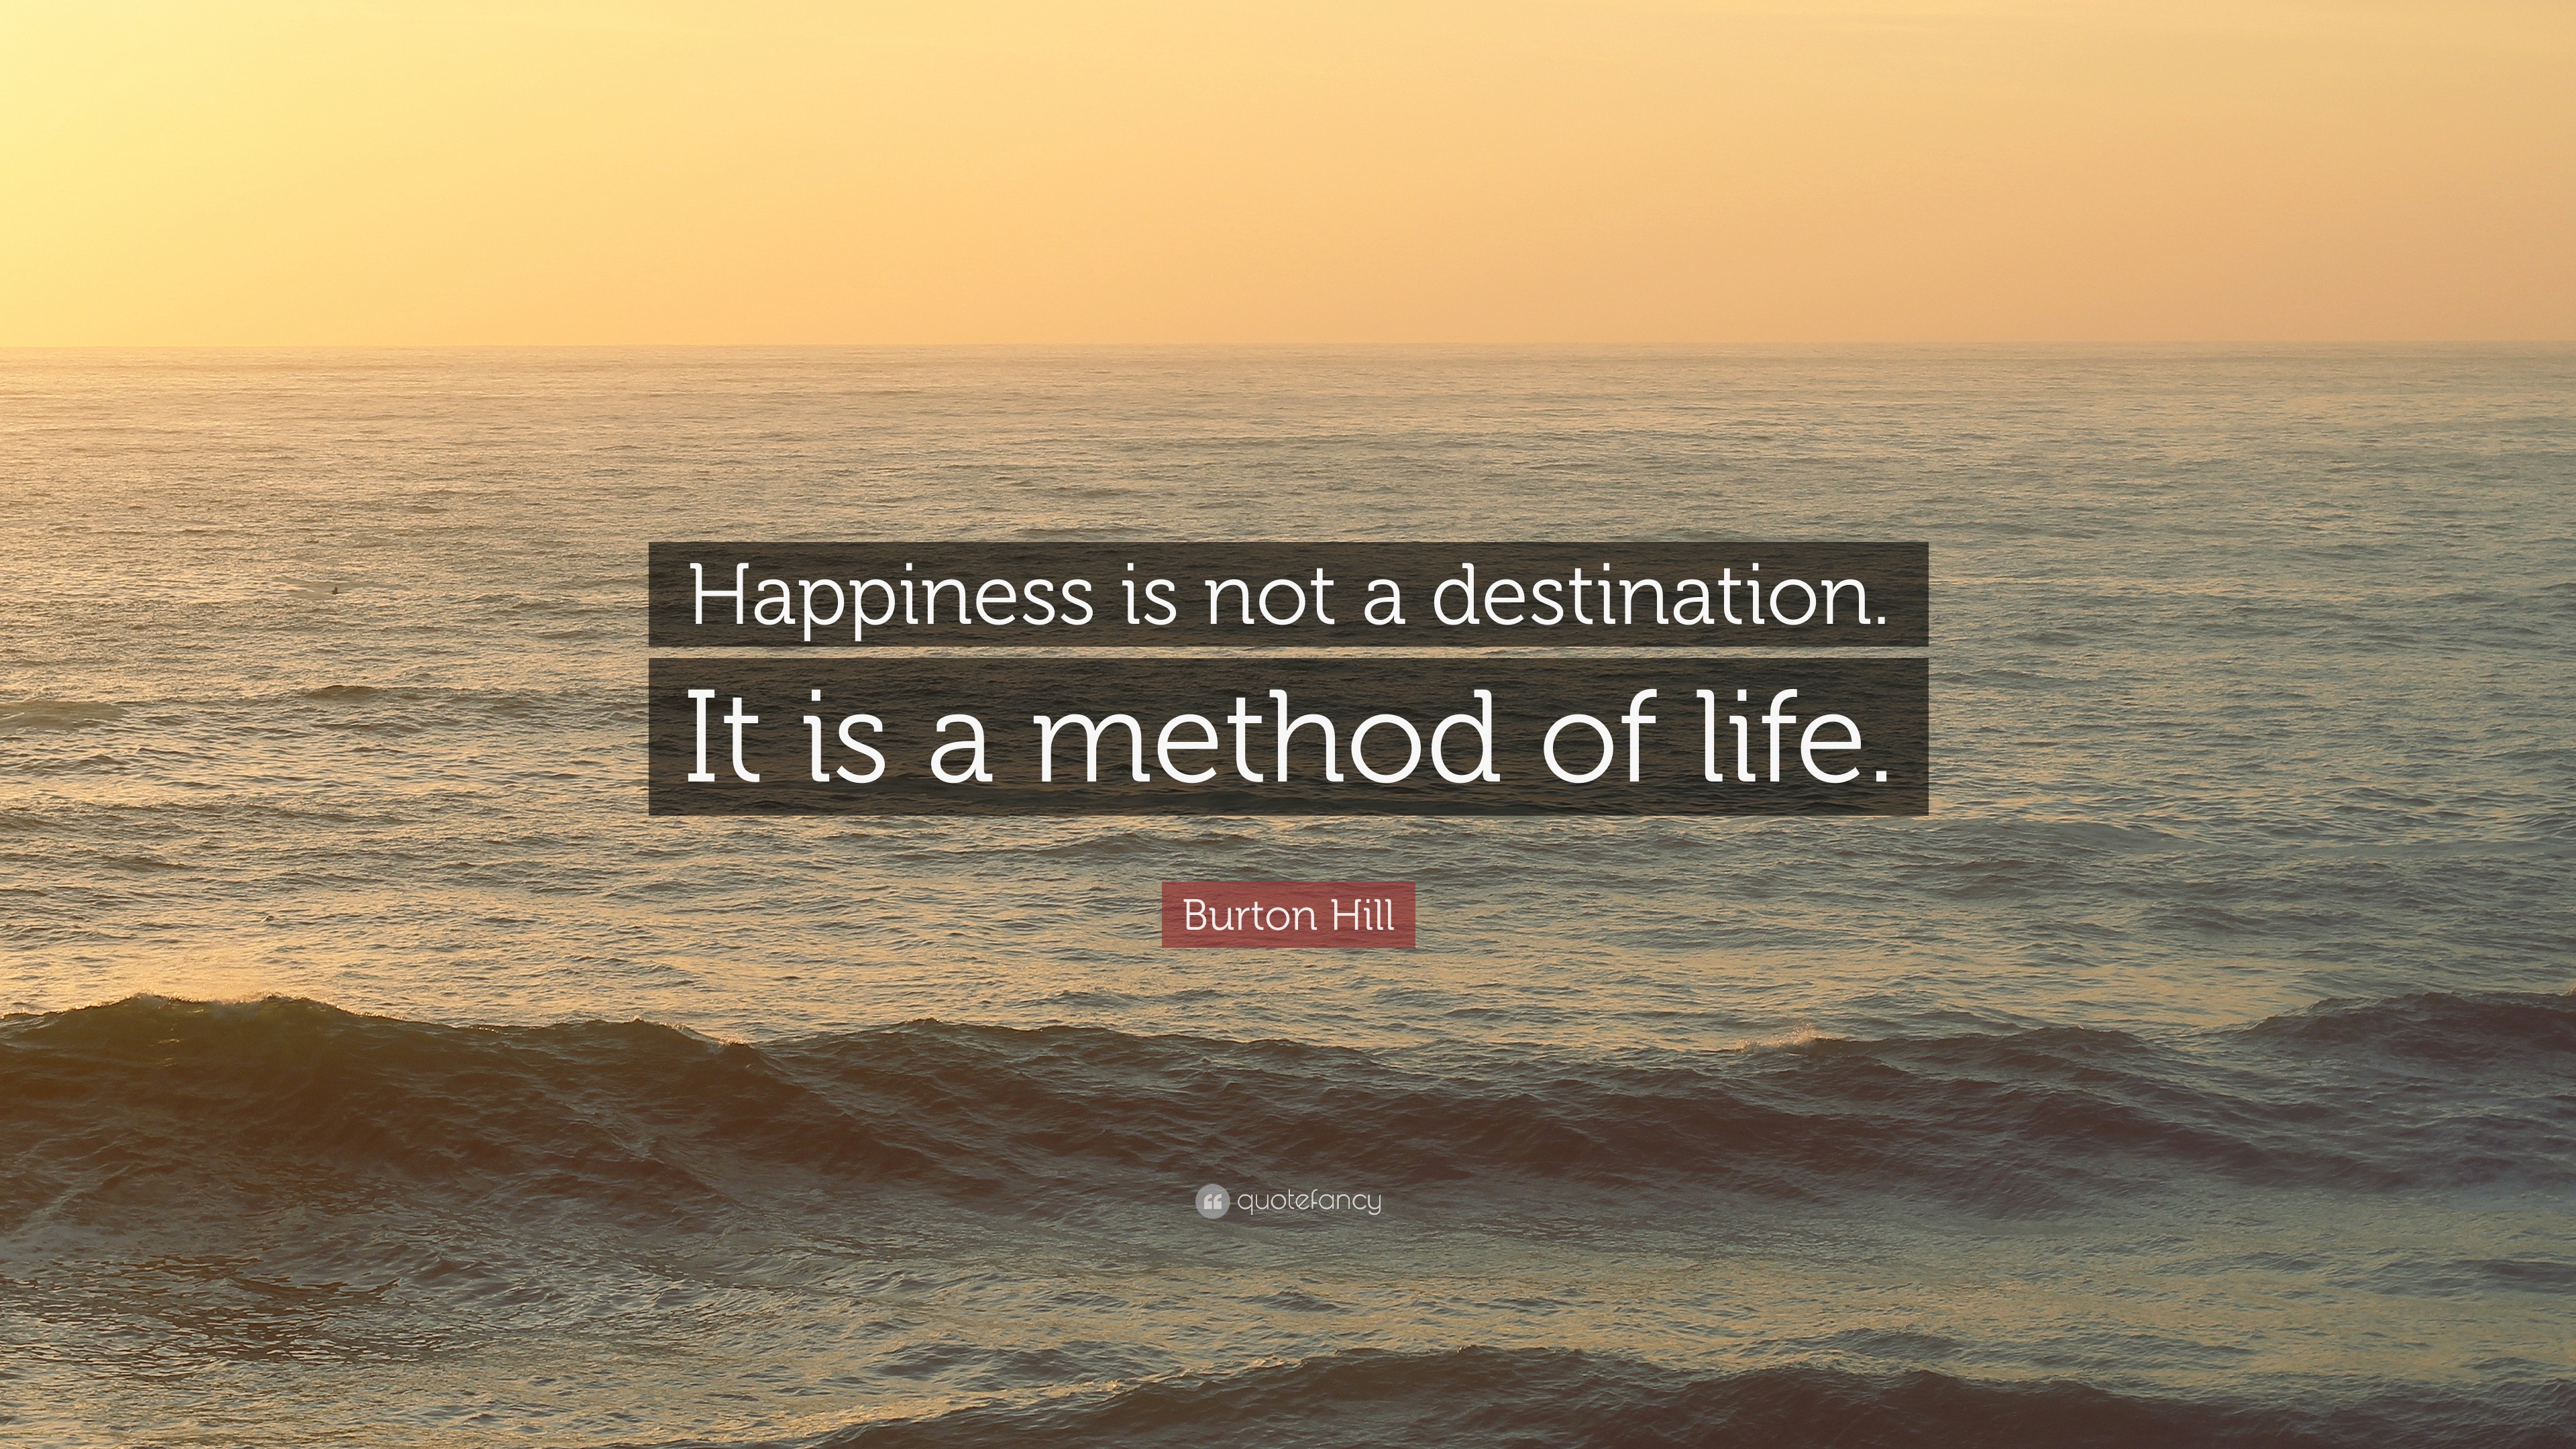 Burton Hill Quote: “Happiness is not a destination. It is a method of ...